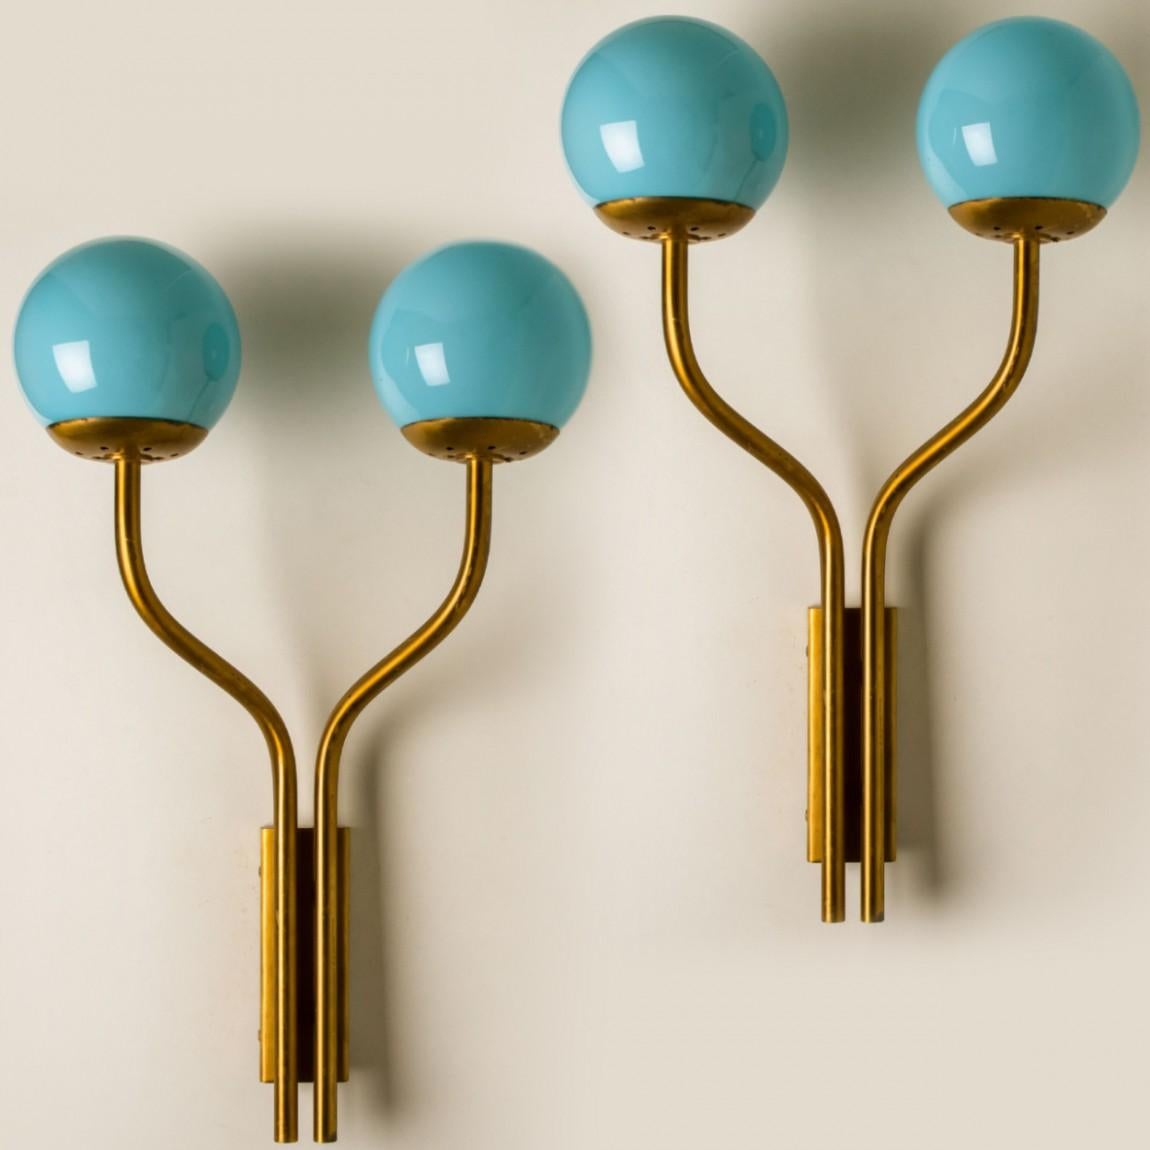 Playful blue wall lights, in the style of Stilnovo from around 1960. The wall lights are made of a brass frame with two arms holding a blue glass ball. When the lights are on, they give a warm light. As shown in the pictures.

Dimensions:
Height: